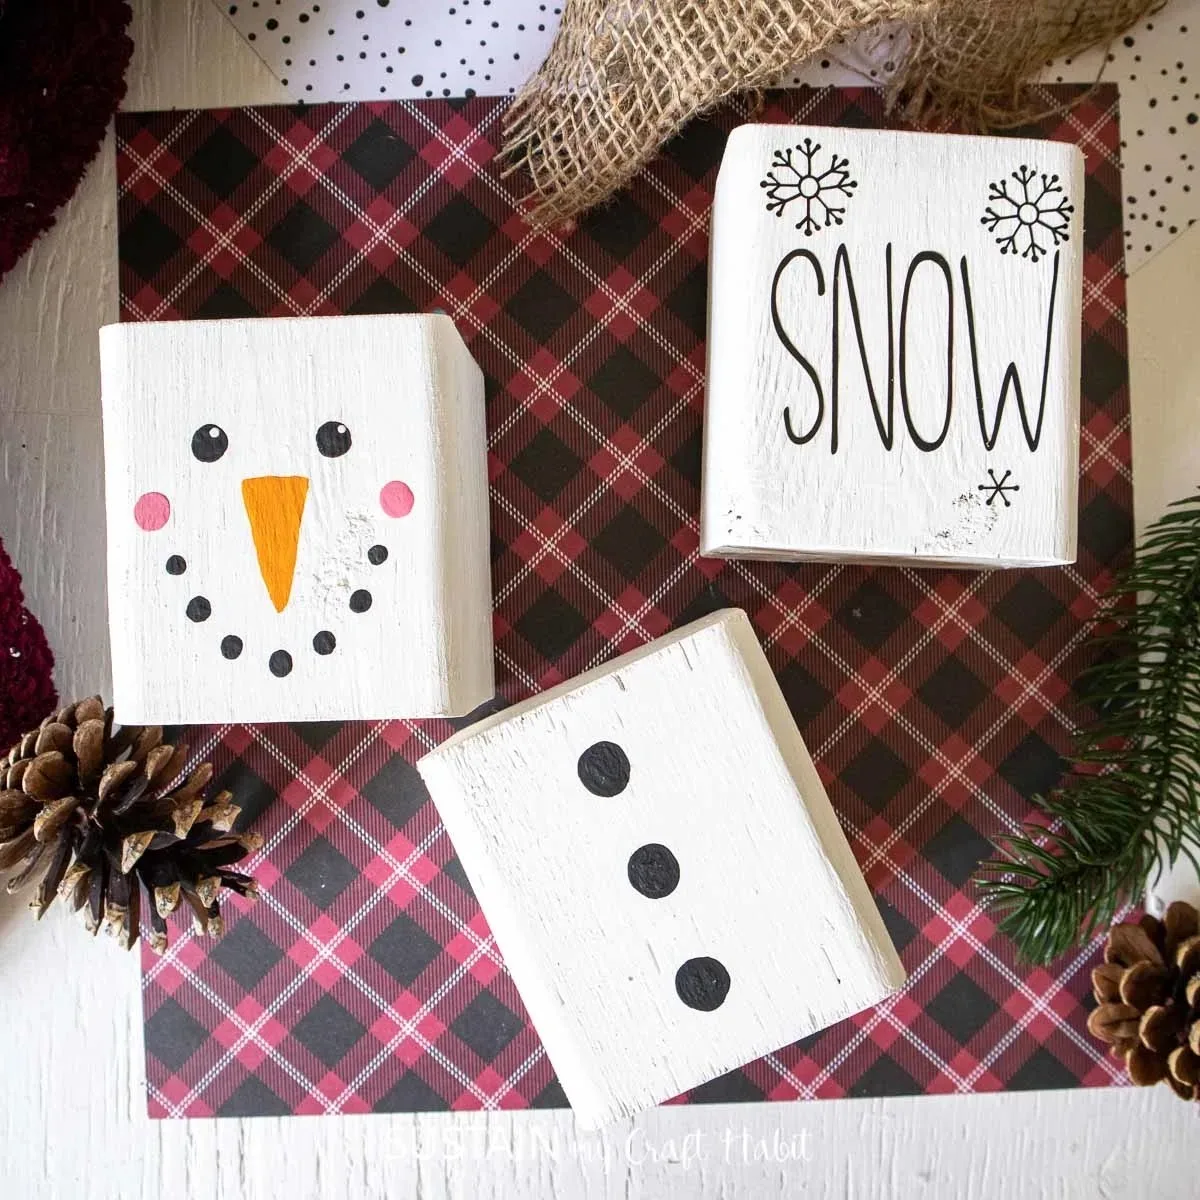 4 Fun Wood Block Christmas Crafts for Kids - The Chirping Moms